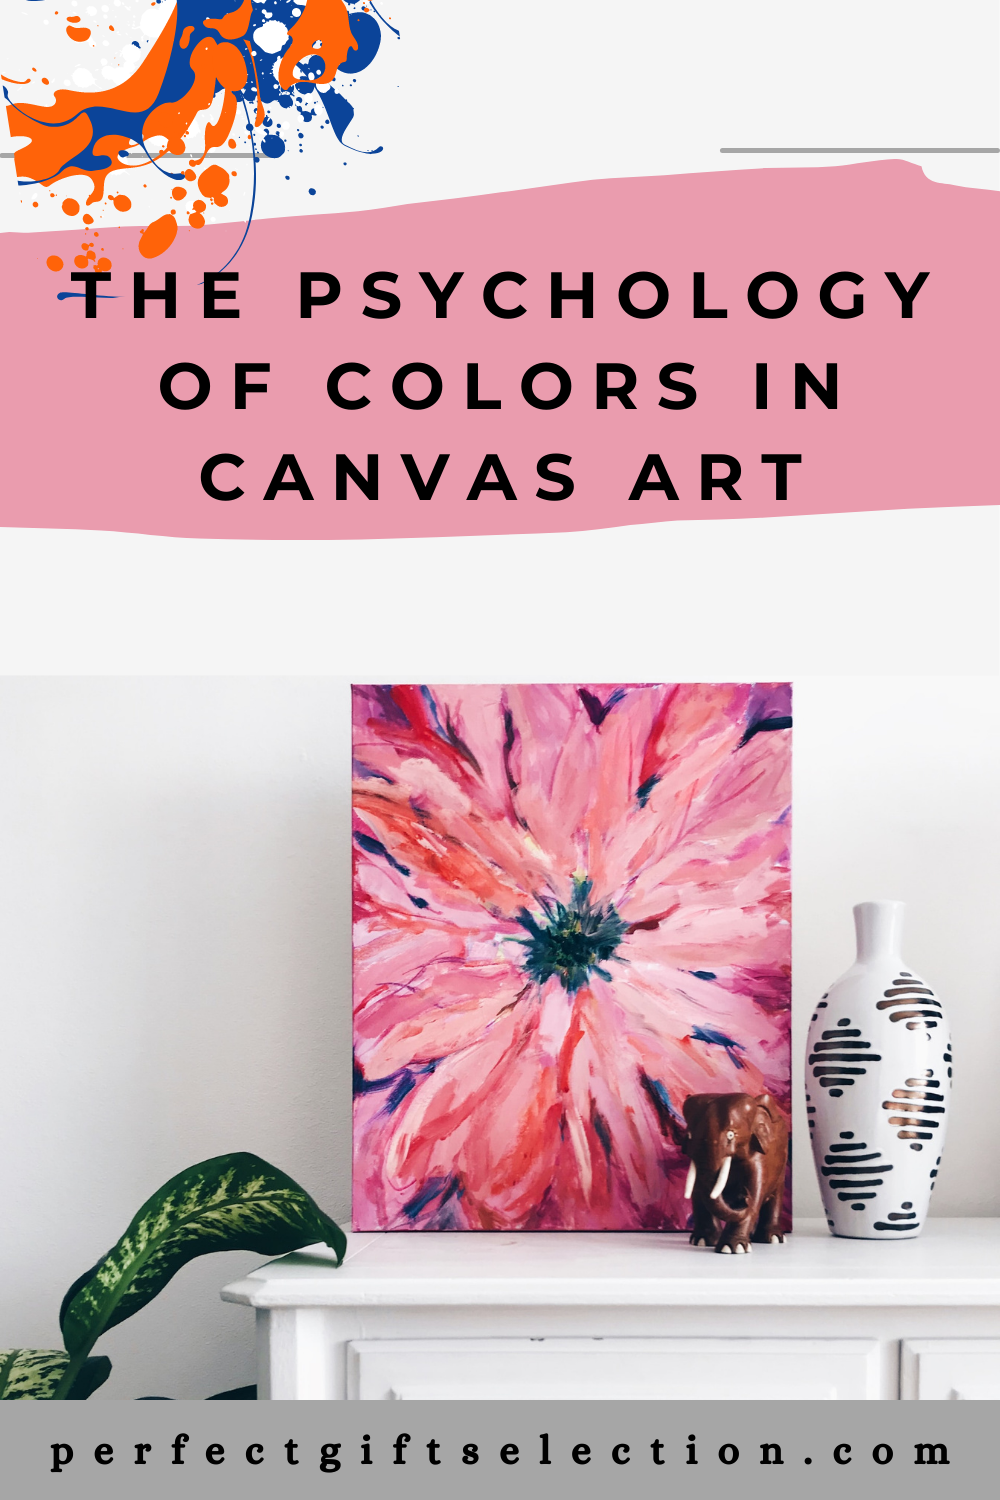 The Psychology of Colors in Canvas Art